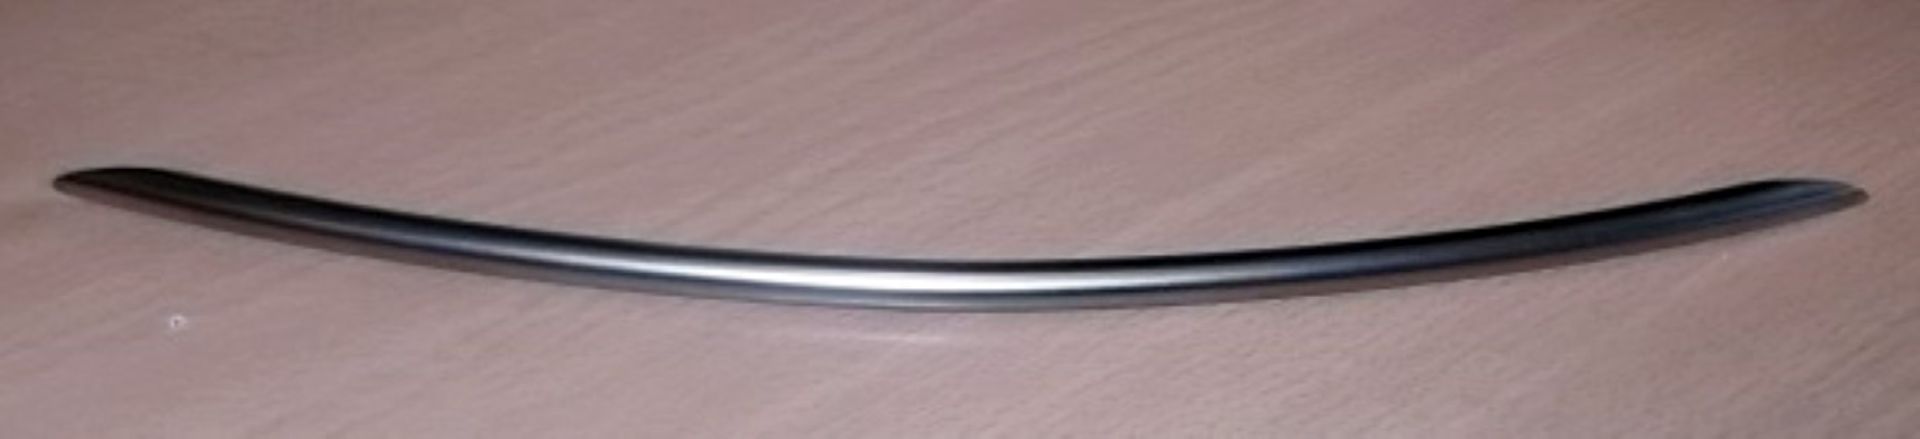 100 x BOW Handle Kitchen Door Handles By Crestwood - 320mm - New Stock - Brushed Nickel Finish - - Image 4 of 8